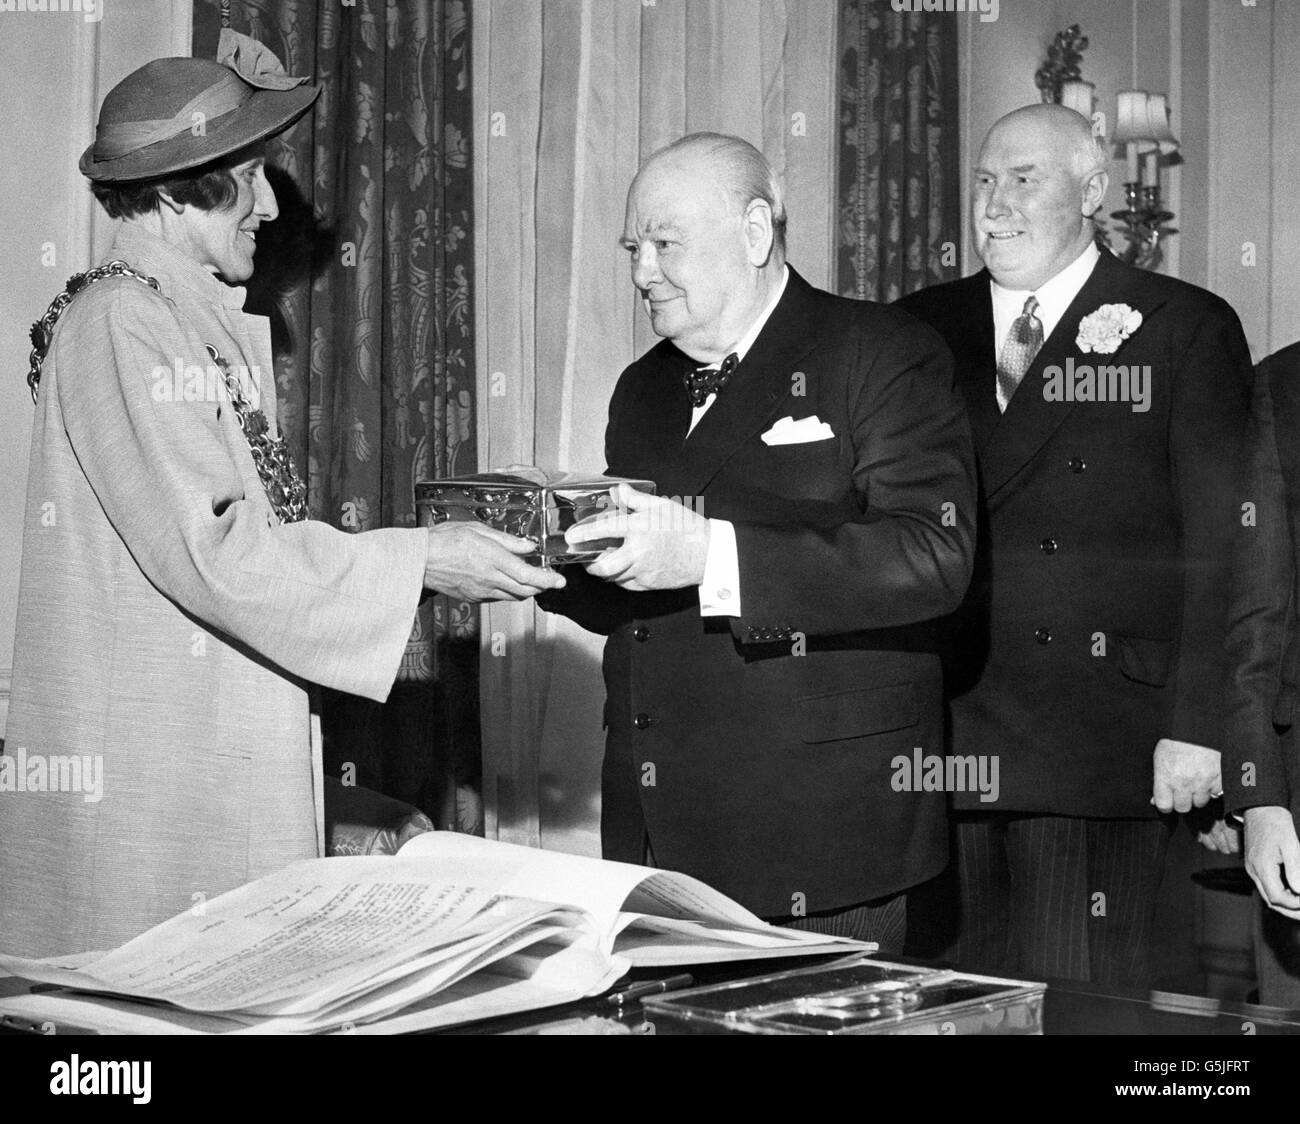 The Mayor of Poole (Dorset), Alderman Miss Margaret Mary Lllewellin hands Prime Minister Sir Winston Churchill a casket containing the certificate of his admission as a Freeman of the Borough of Poole. The ceremony was performed in the drawing room of 10 Downing Street, London. Stock Photo